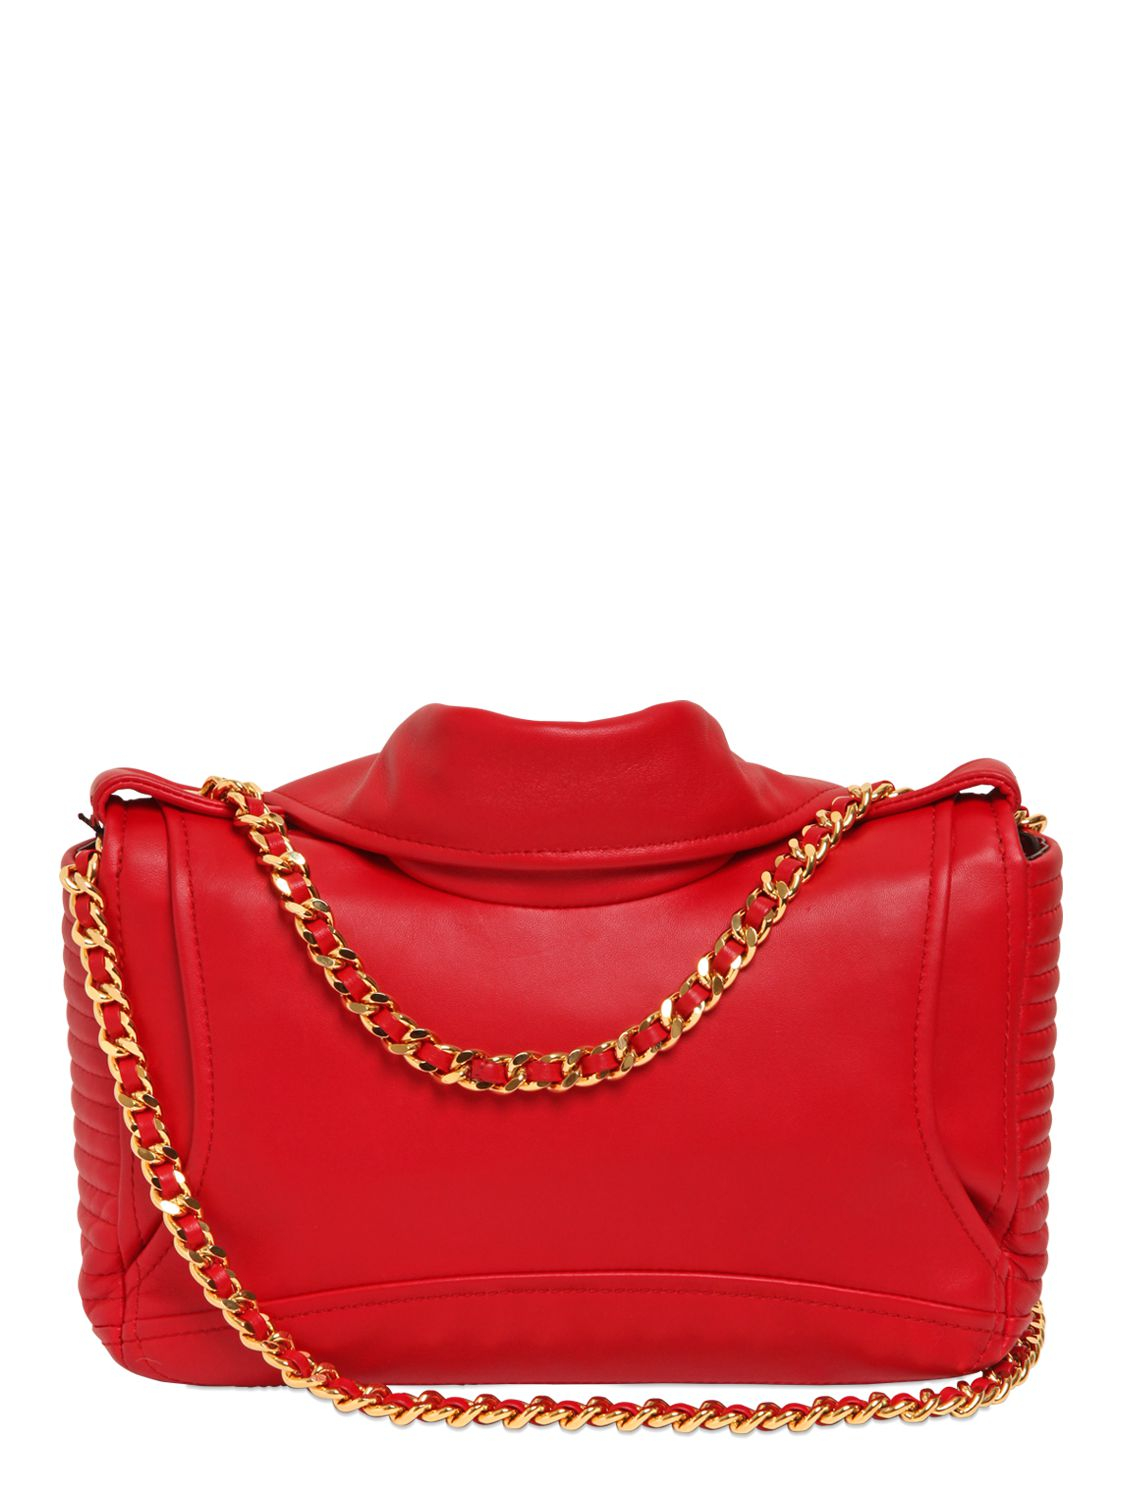 Moschino Biker Jacket Nappa Leather Shoulder Bag in Red - Lyst